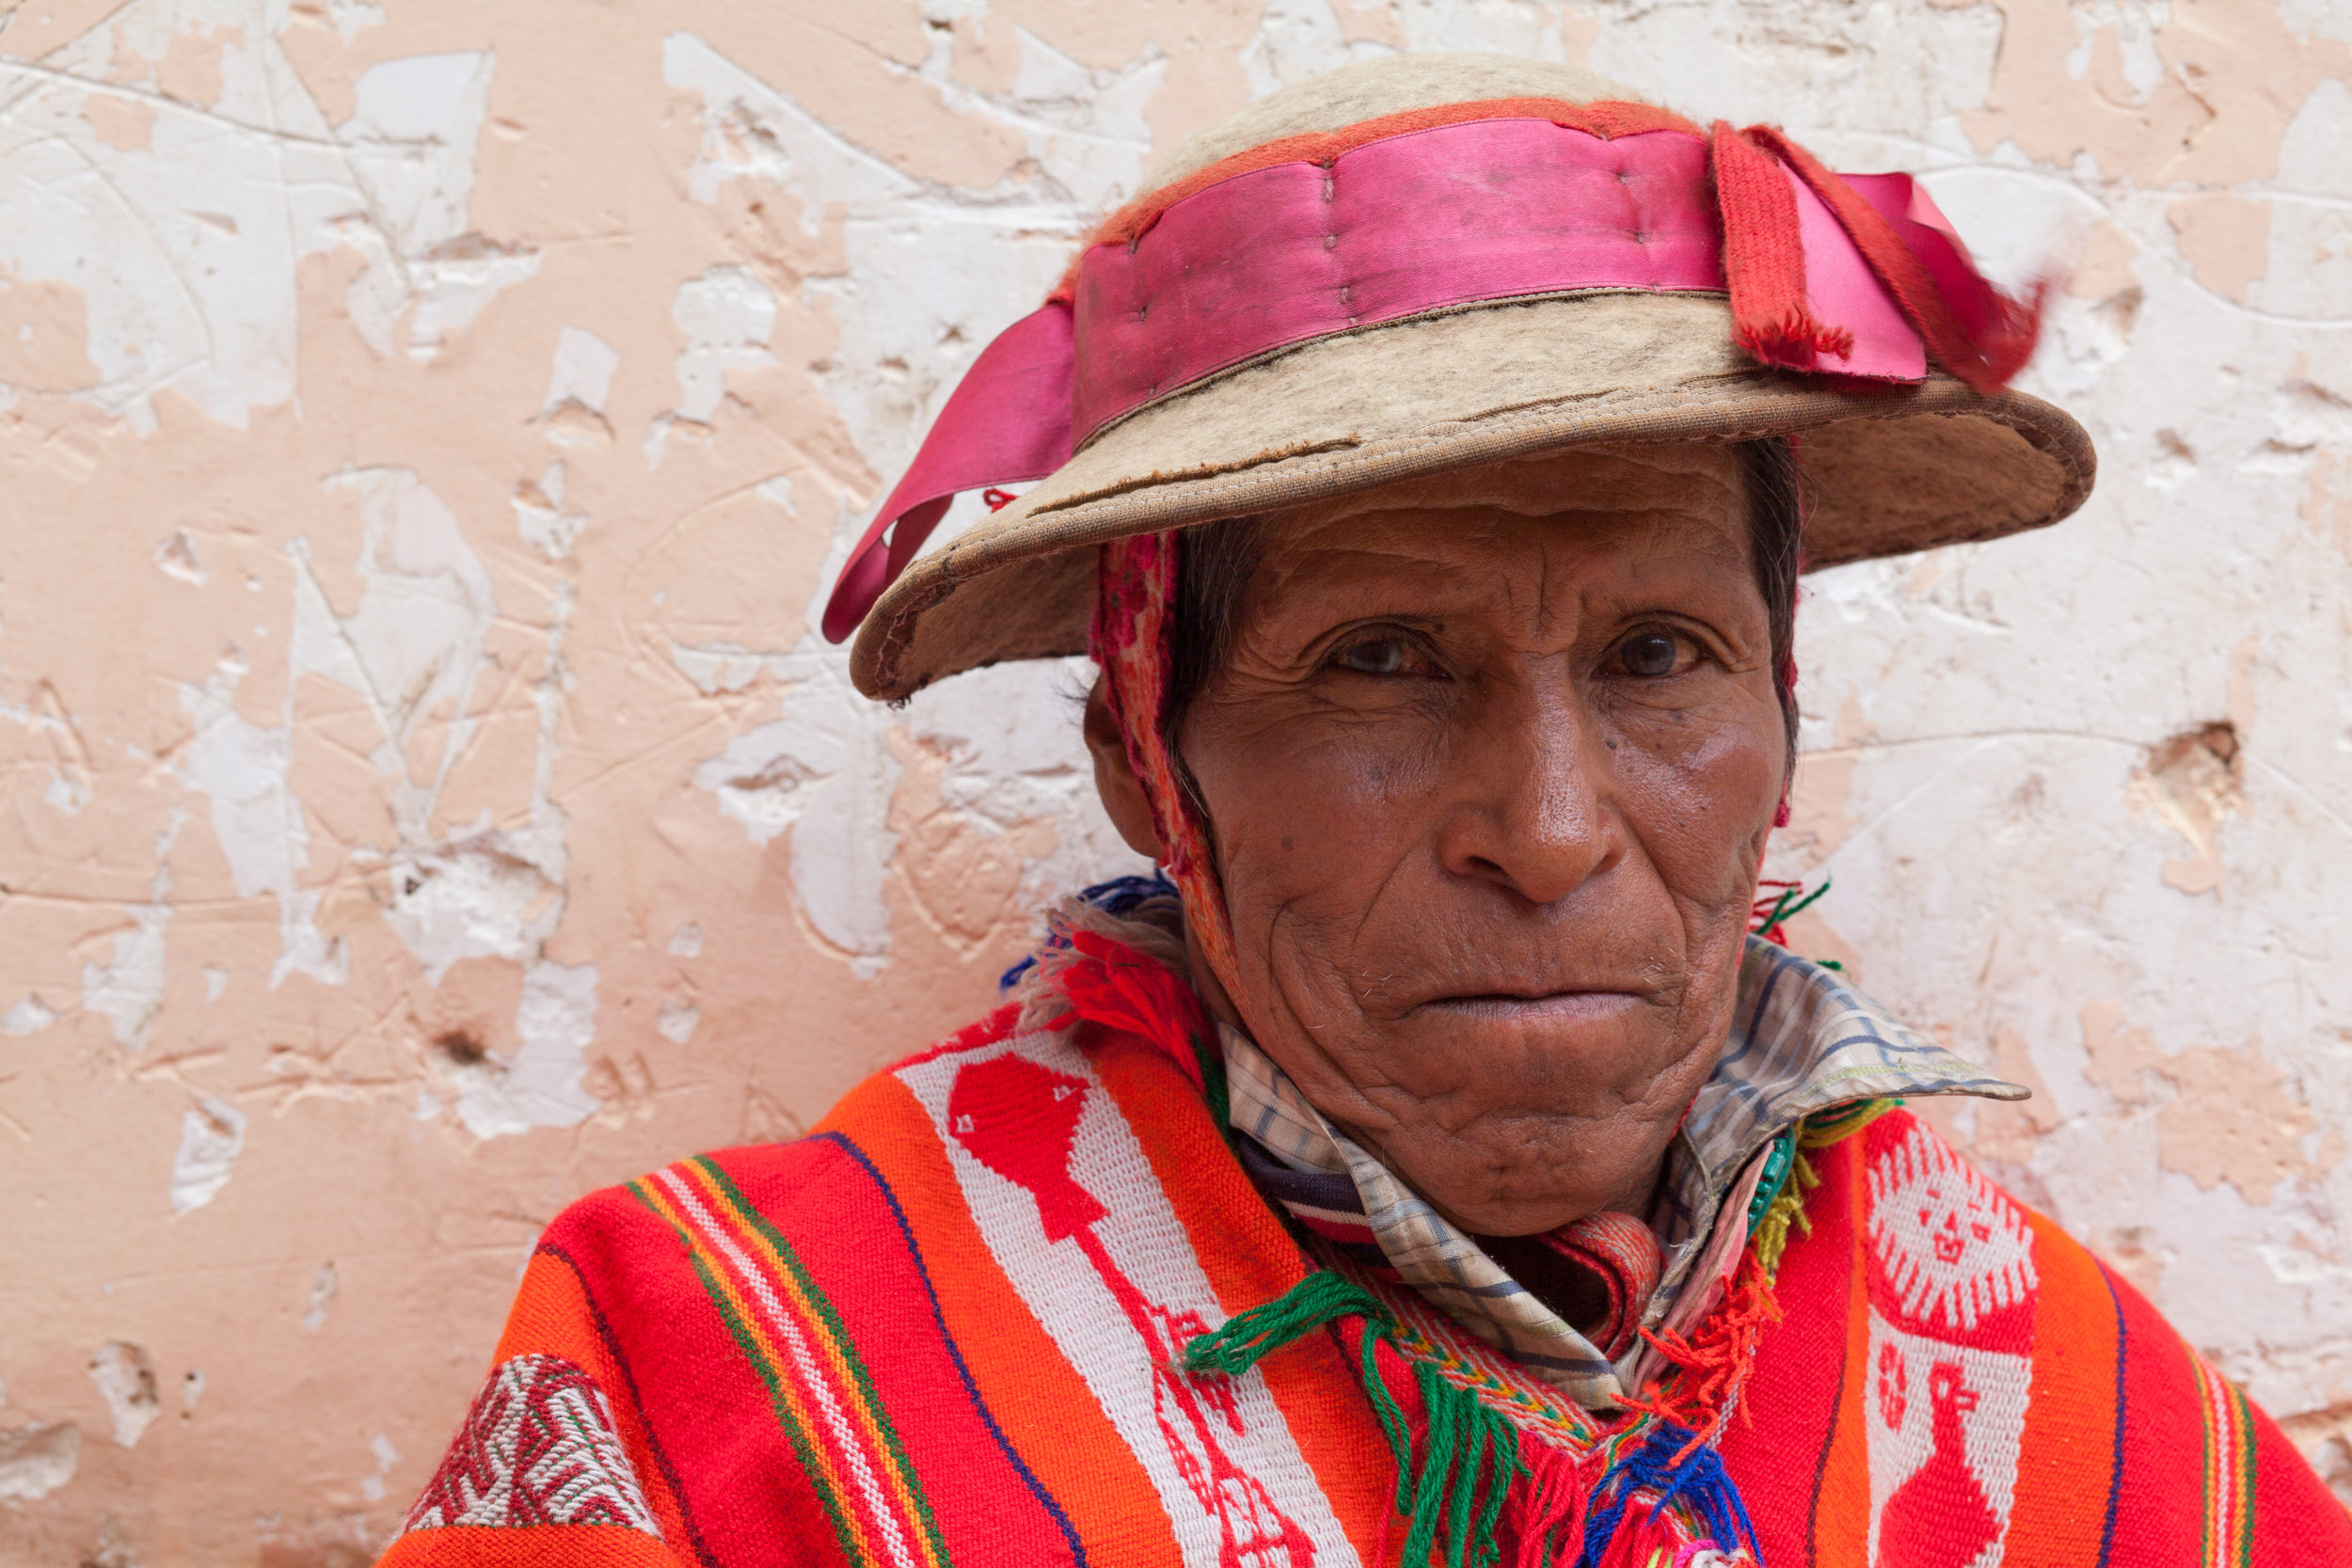 Peruvian portrait in Ollantaytambo in the Sacred Valley.